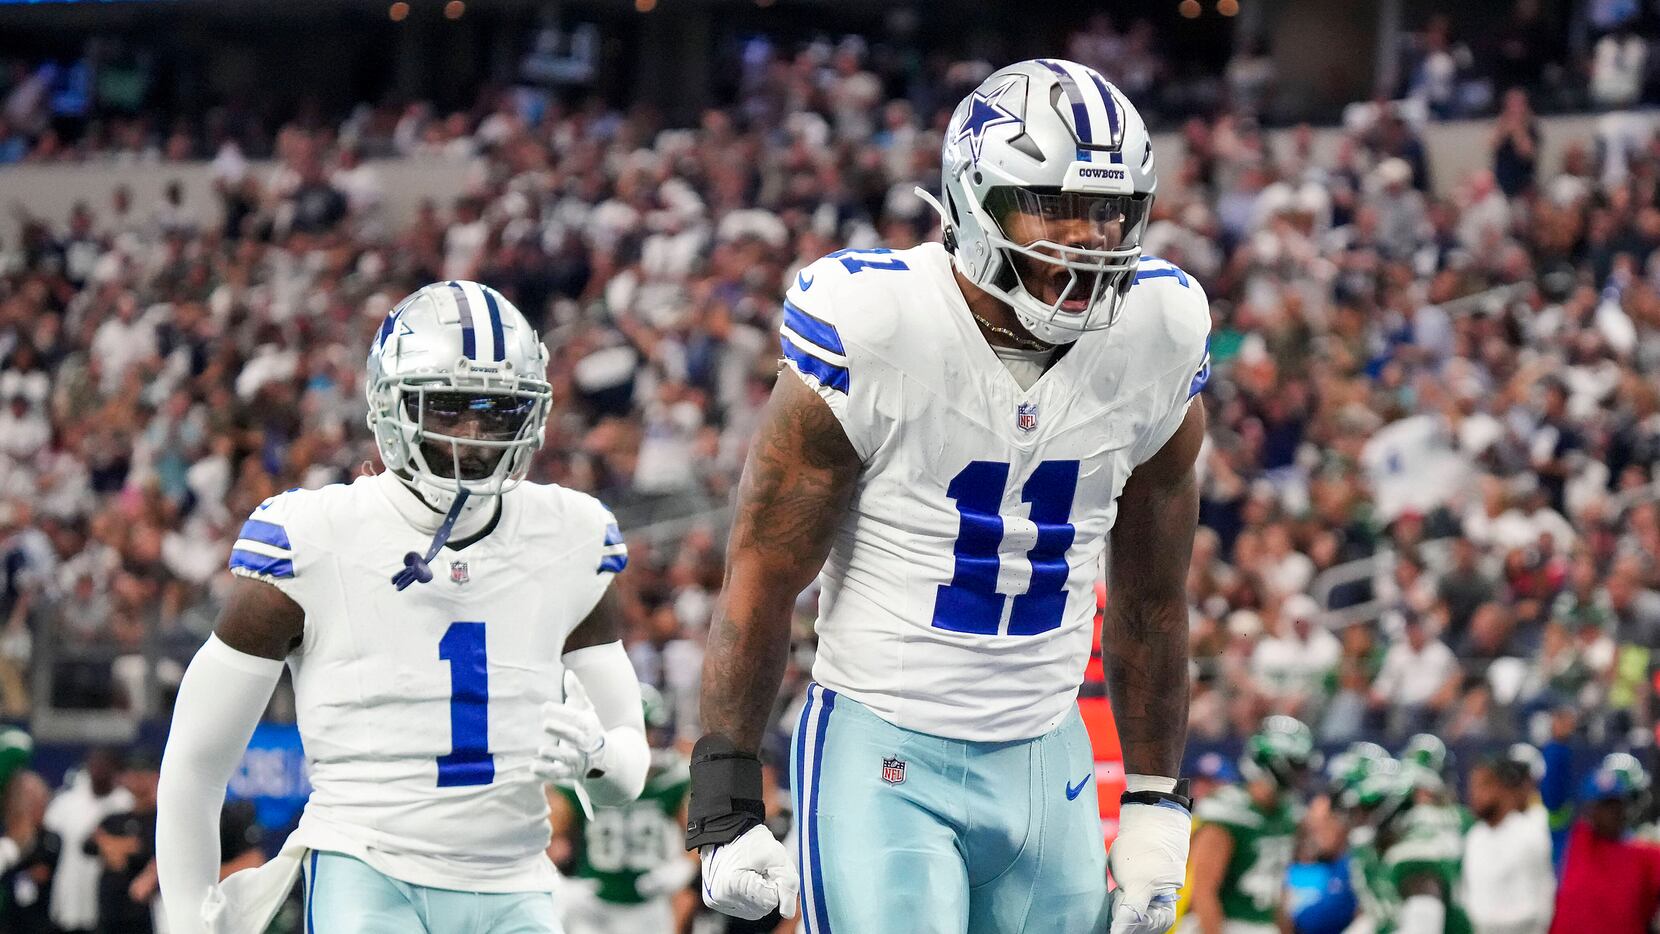 Are Cowboys Fans Ready to Start Getting Their Hopes Up?